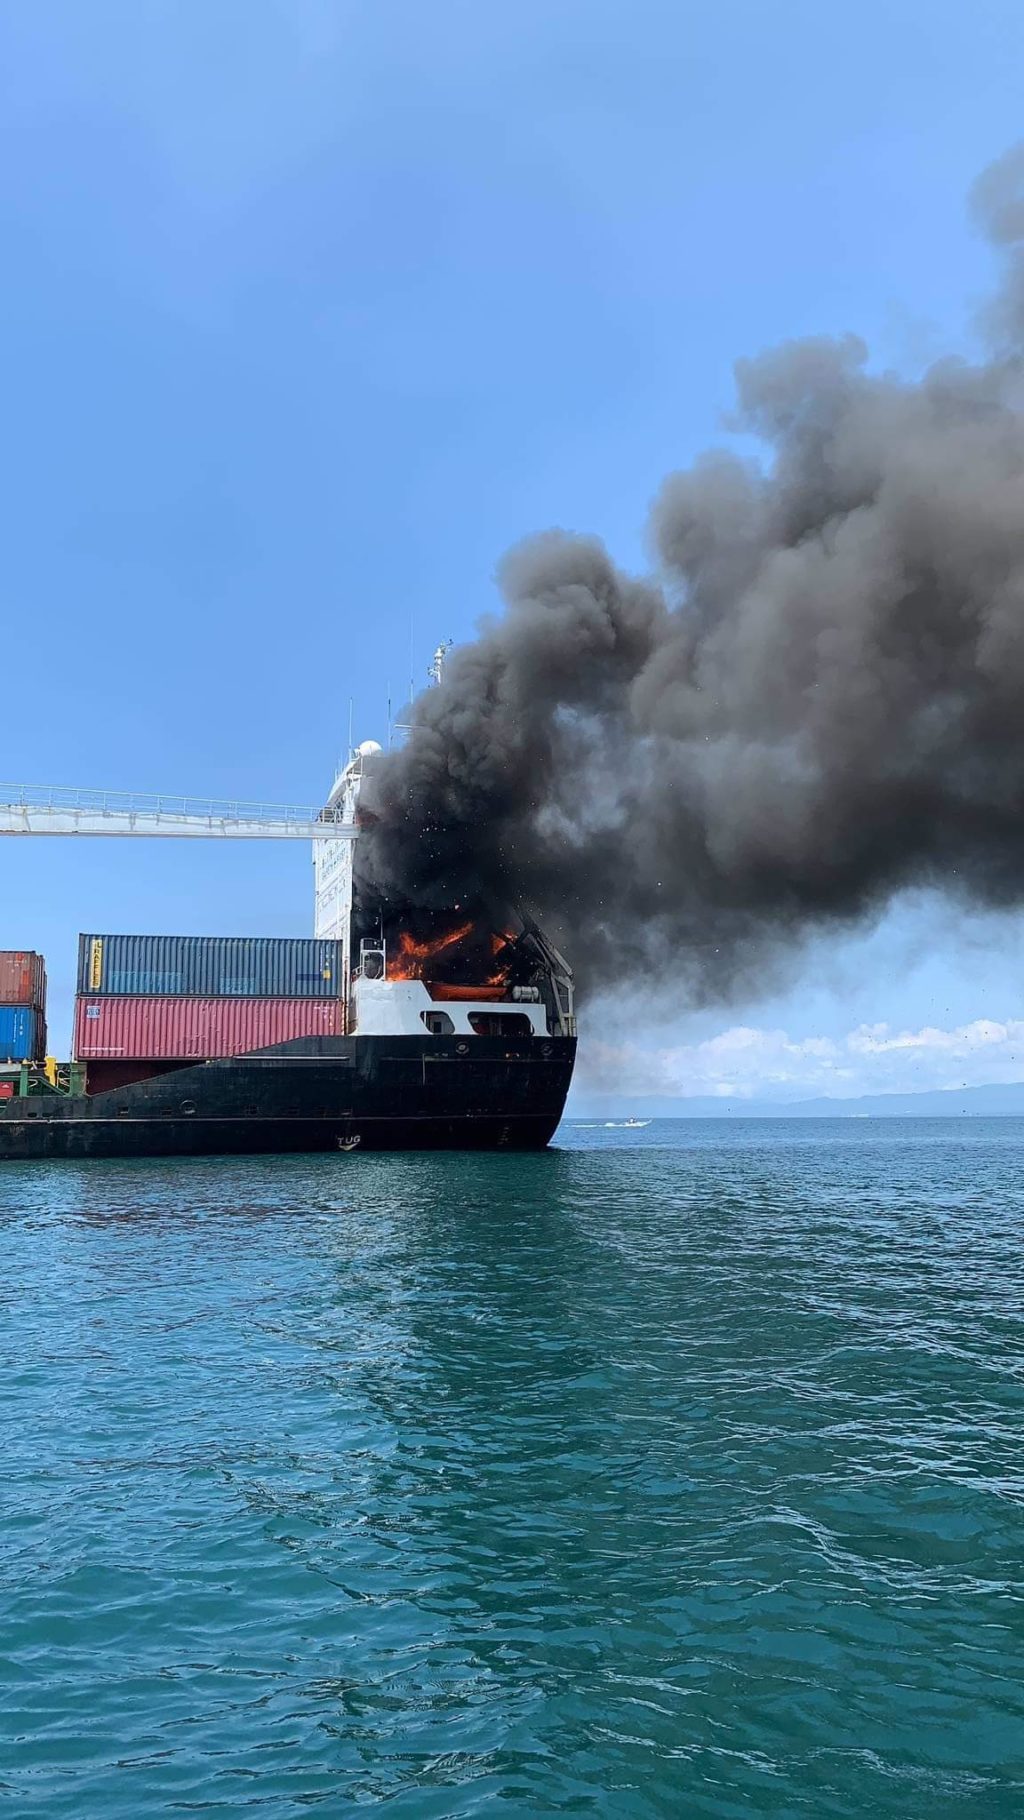 Authorities respond to a fire that hit a cargo vessel while sailing the coasts of Talisay City.